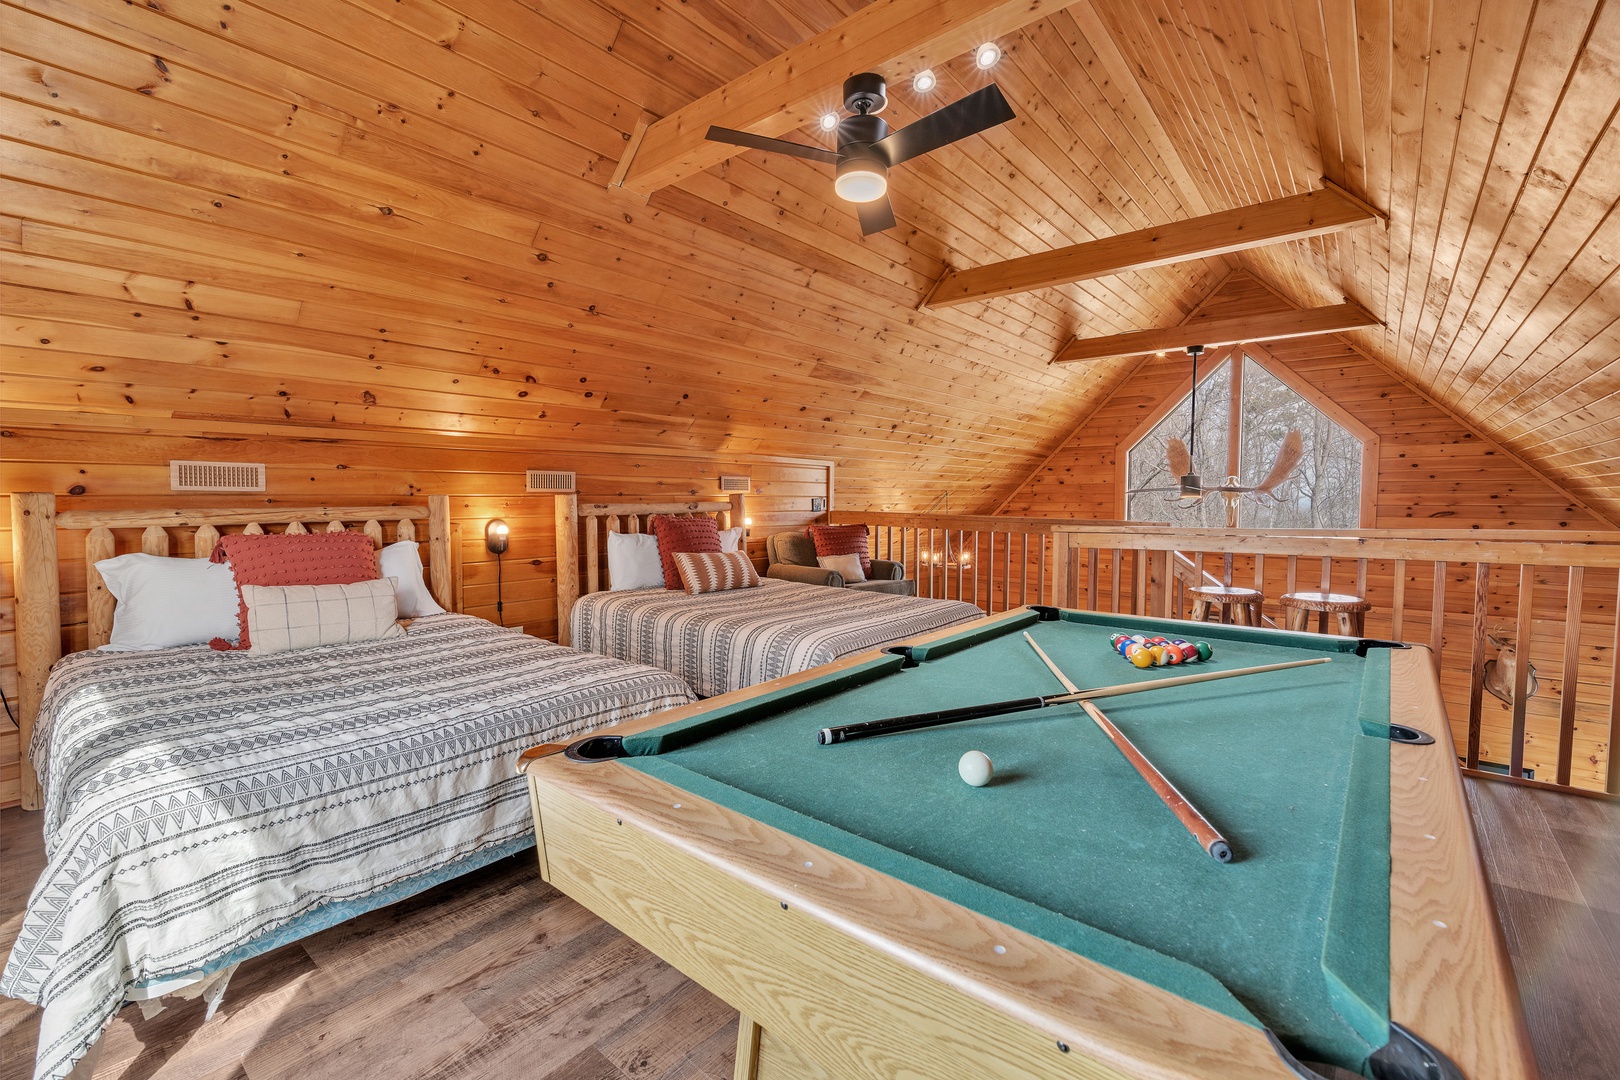 Loft with 2 full beds, pool table, and balcony